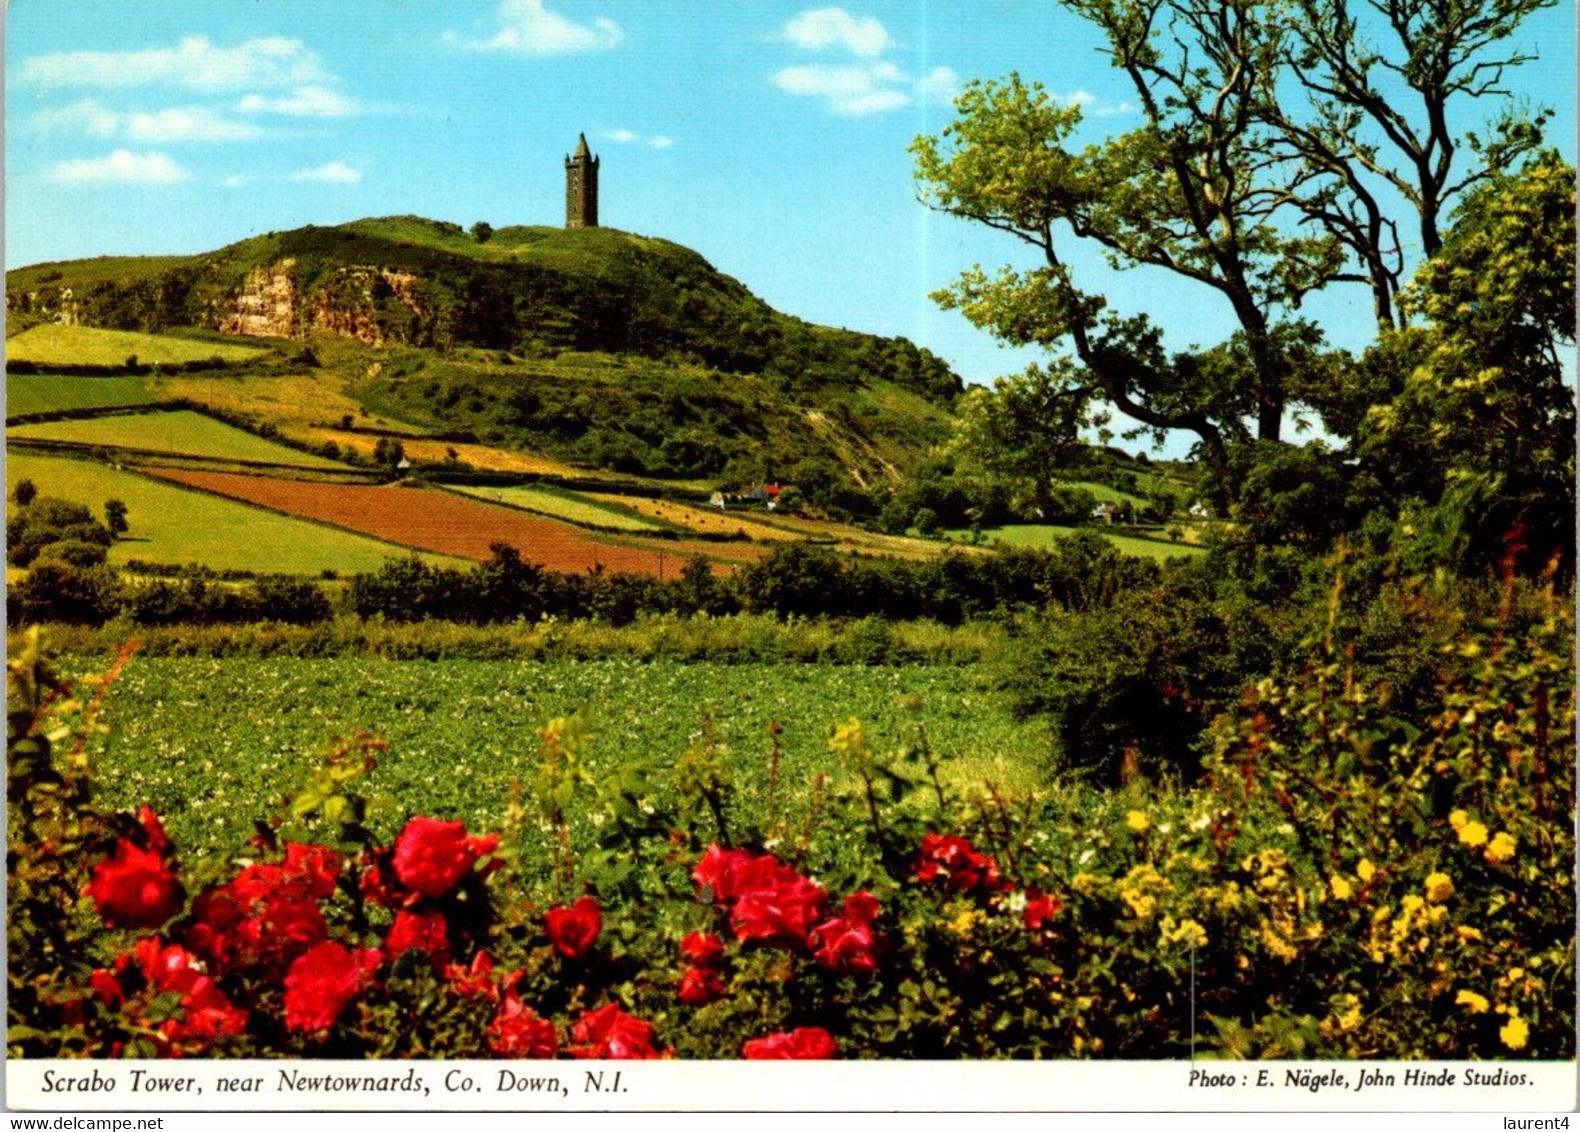 (1 G 25) Ireland - Co Down  - Scrabo Tower - Down